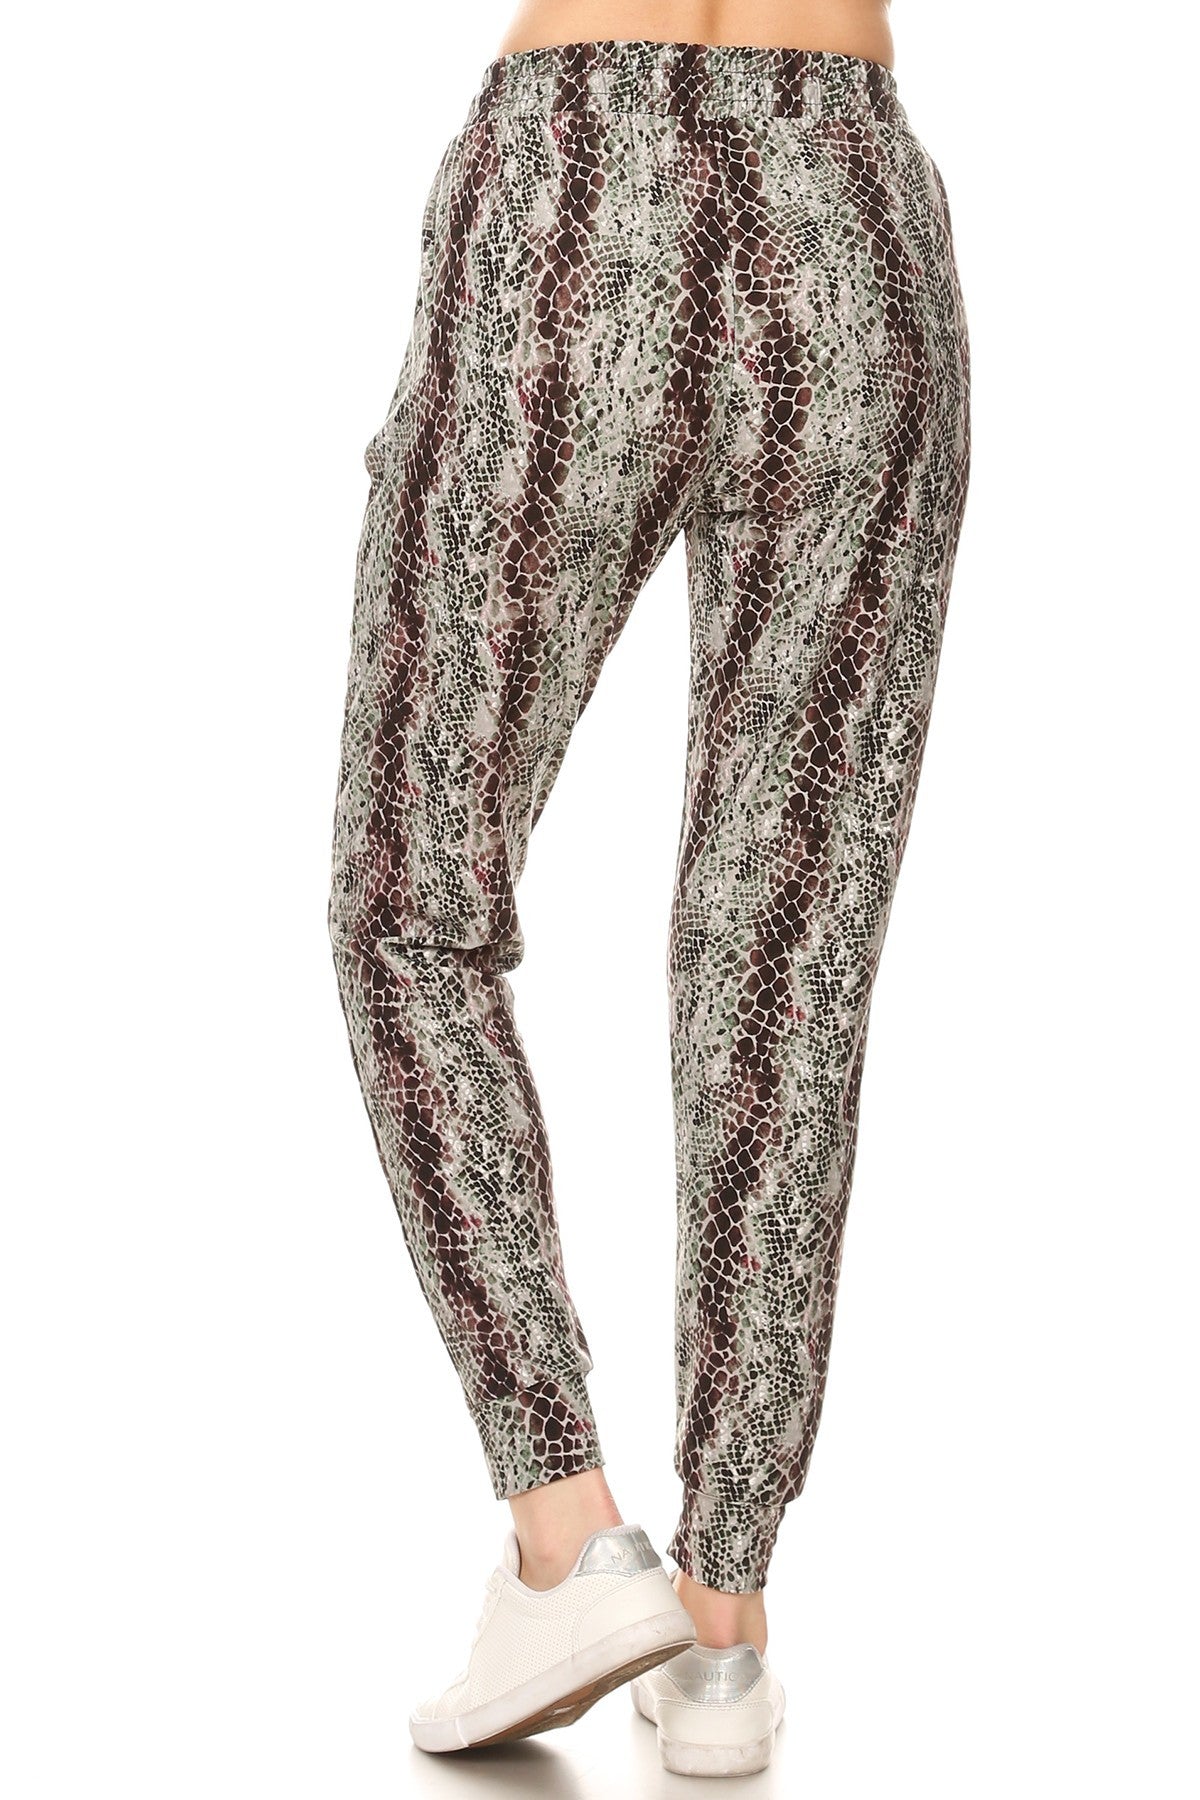 Snakeskin Printed Joggers With Solid Trim, Drawstring Waistband, Waist - K I T S H O P 